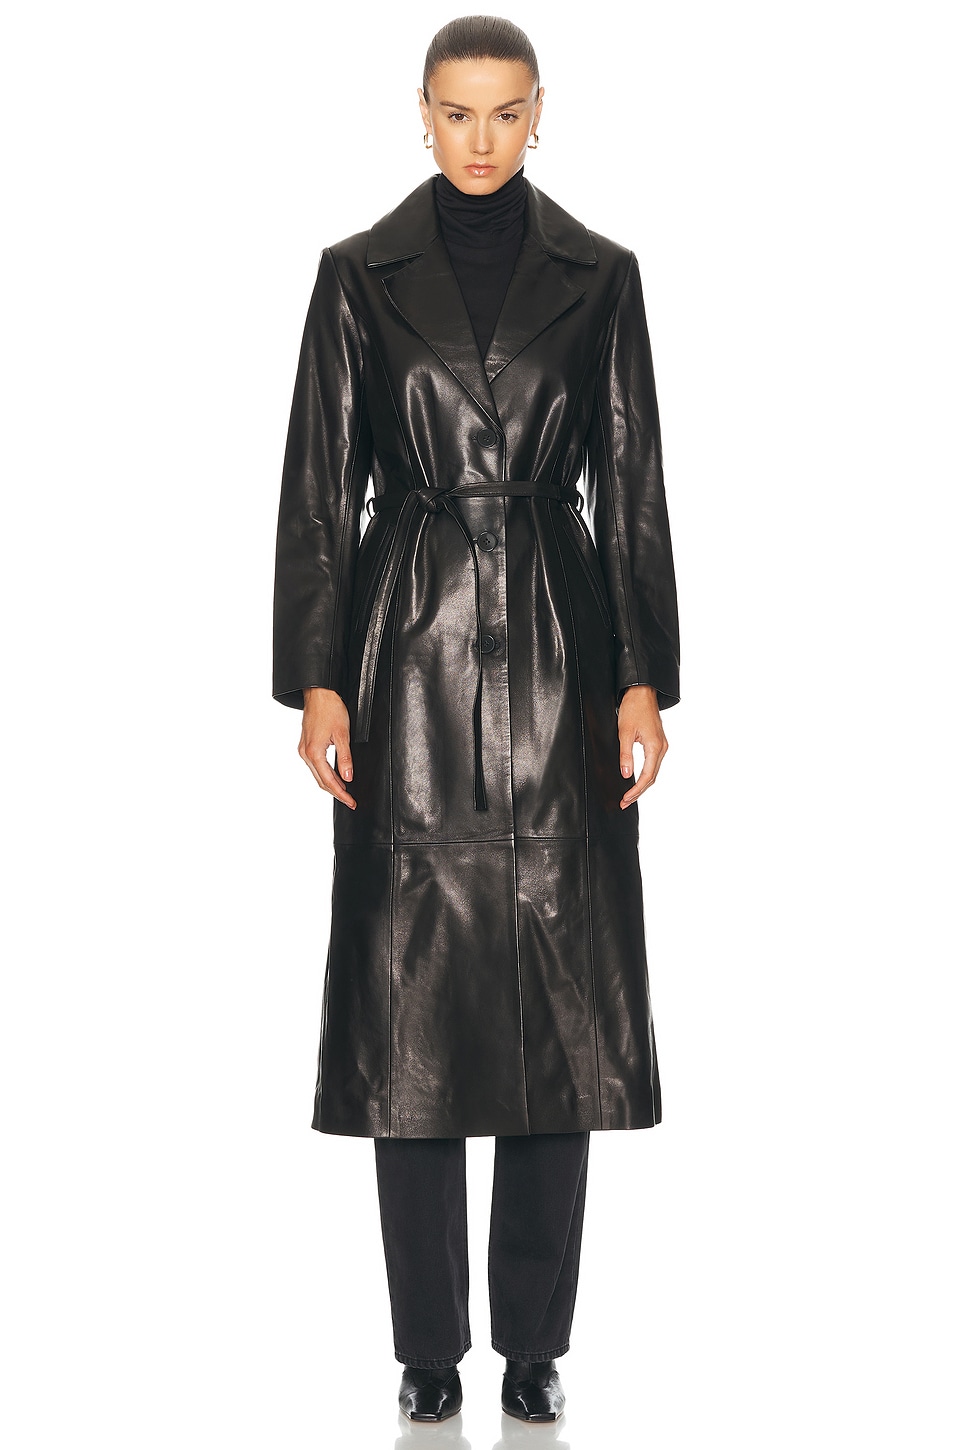 Nour Hammour Tamara Belted Leather Trench Coat In Black